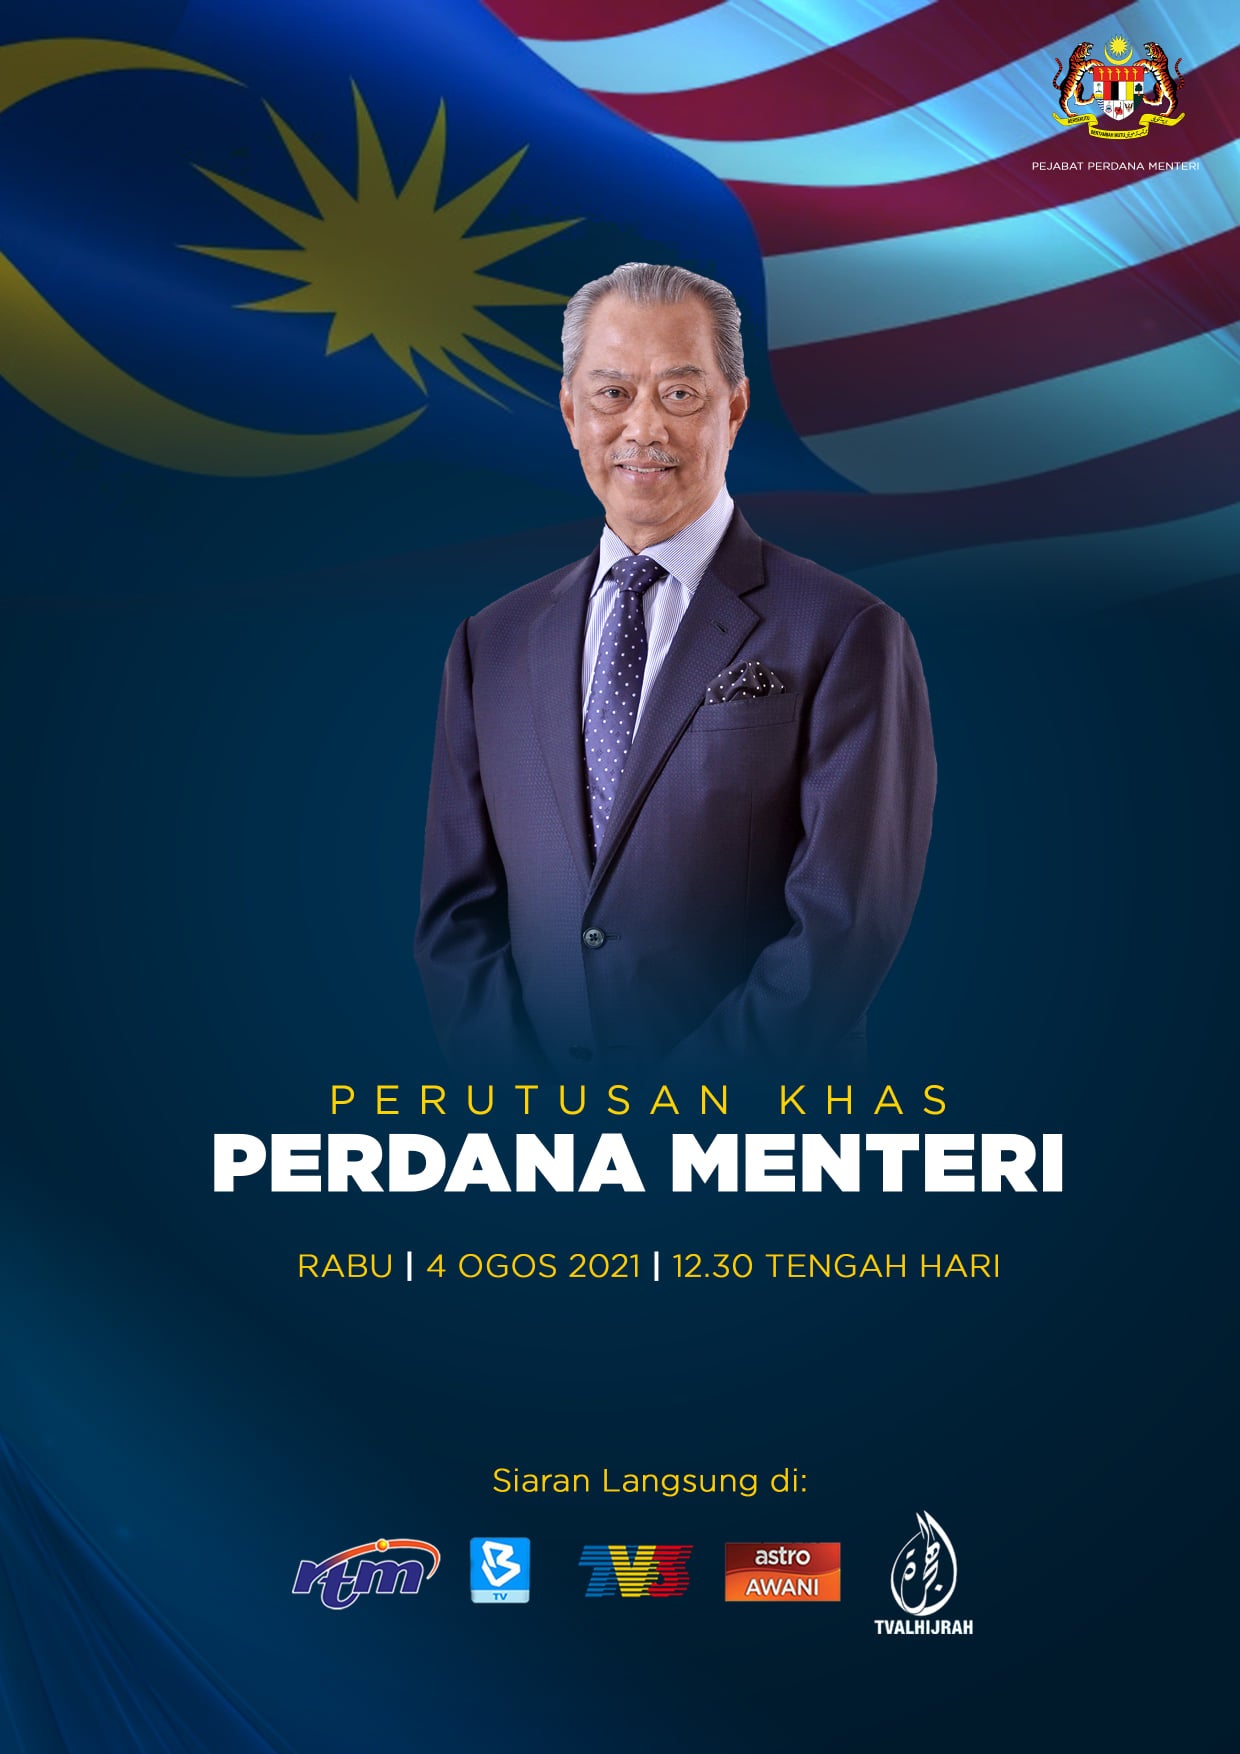 Prime Minister Muhyiddin Yassin Poster 4 Aug